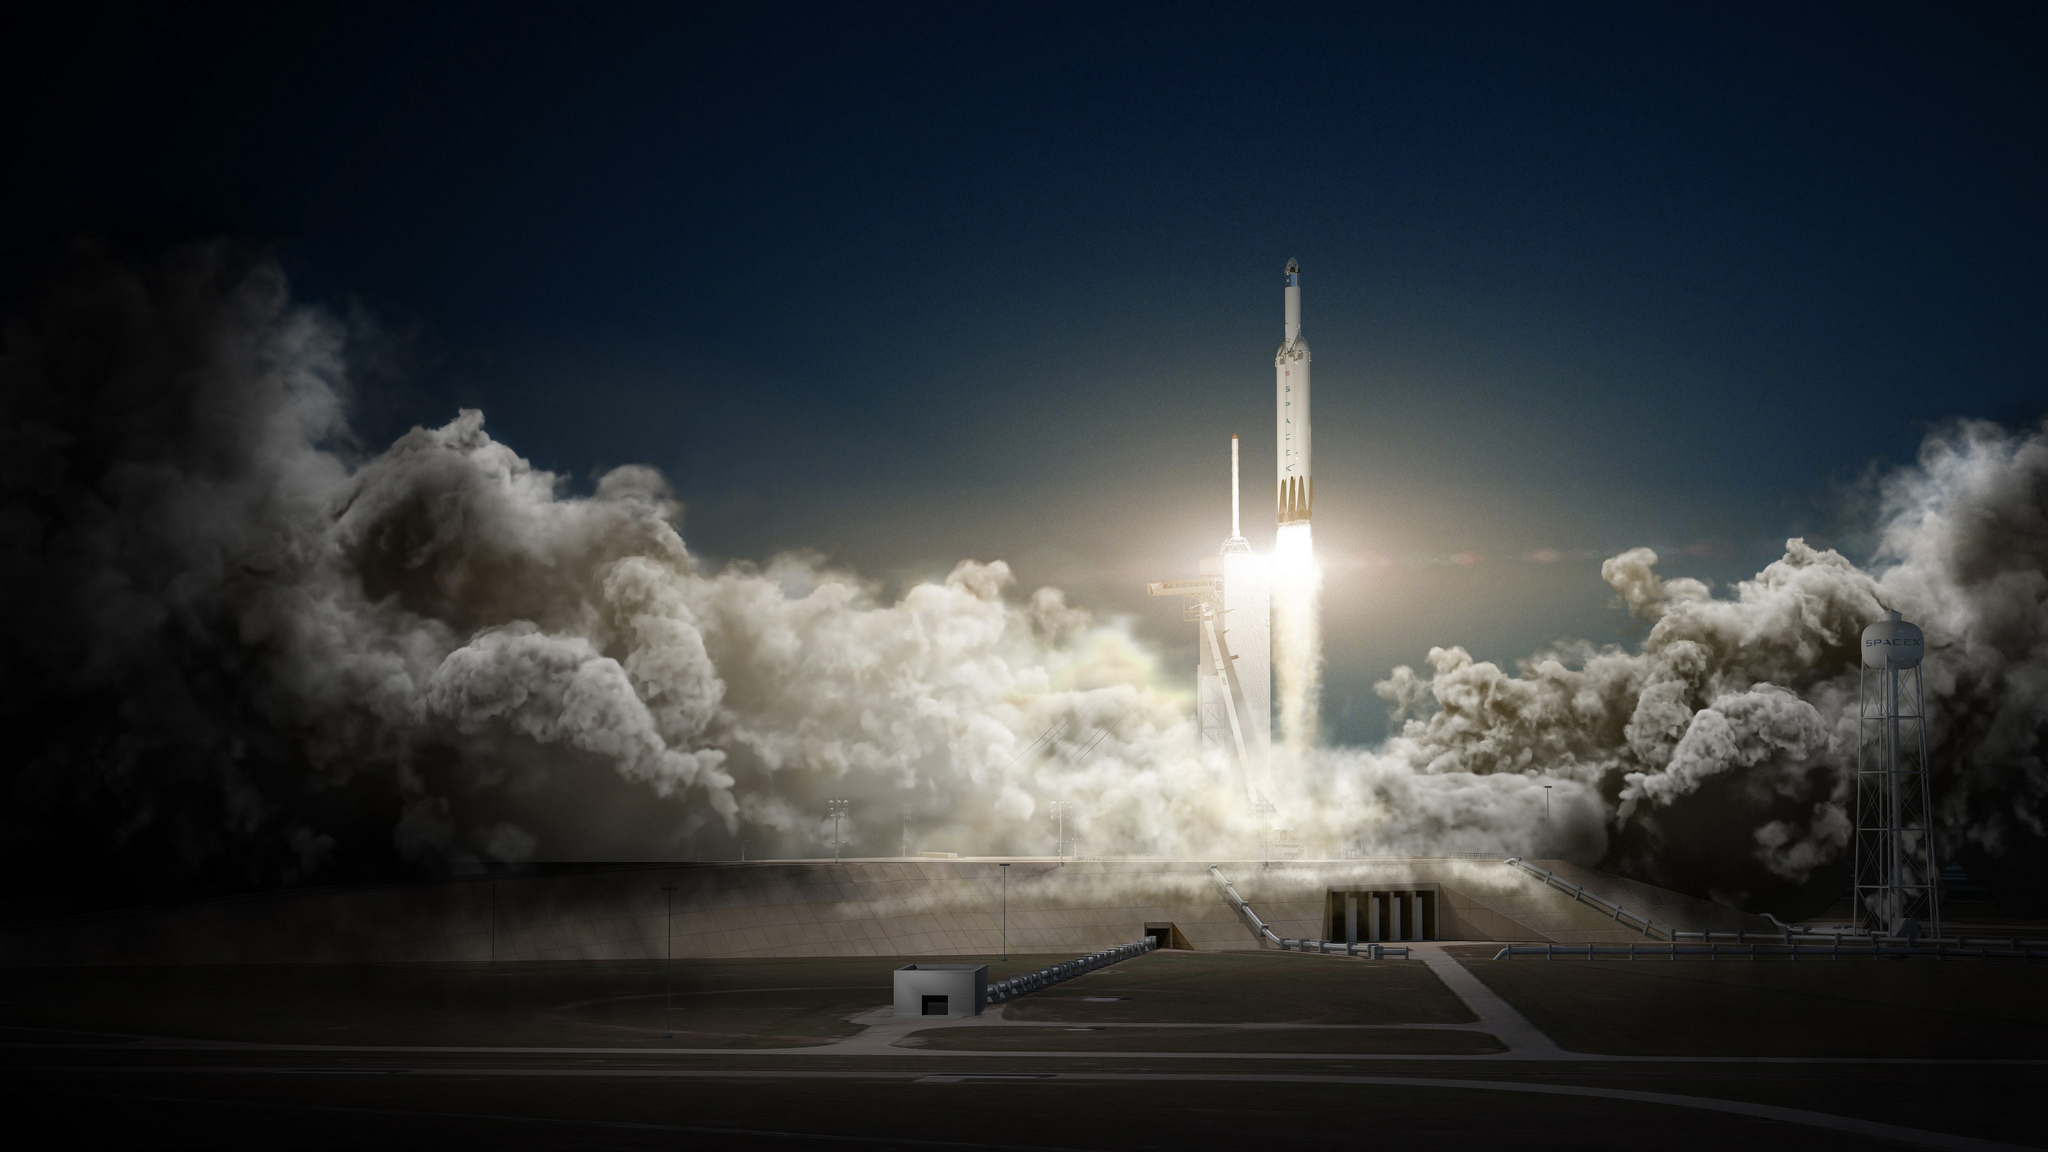 SpaceX Will Launch Its Falcon Heavy Rocket in December